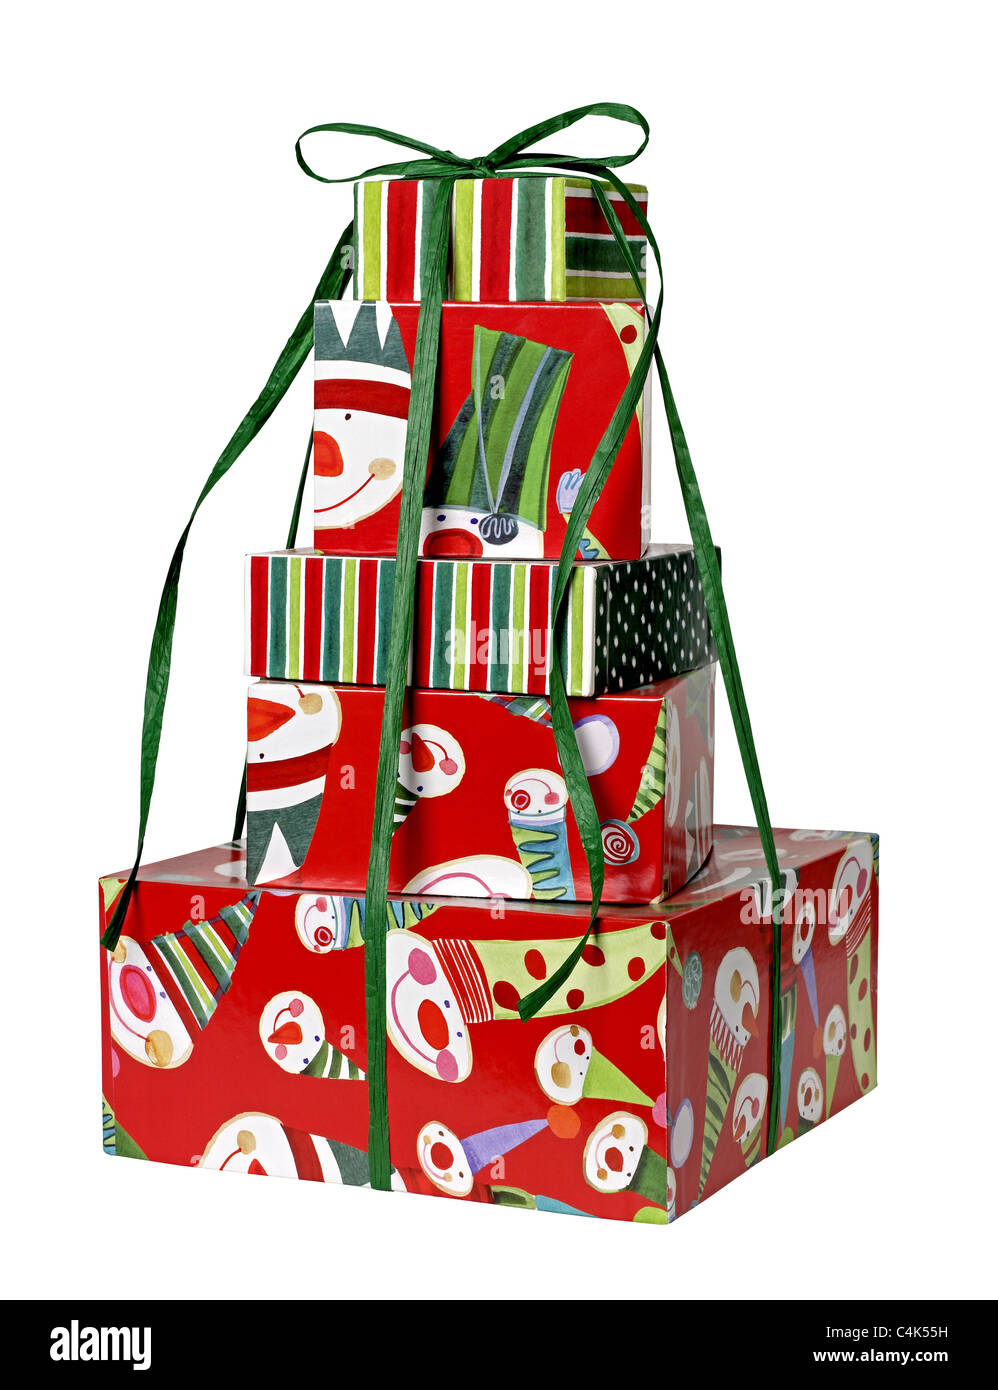 Gift boxes wrapped in green ribbon Stock Photo